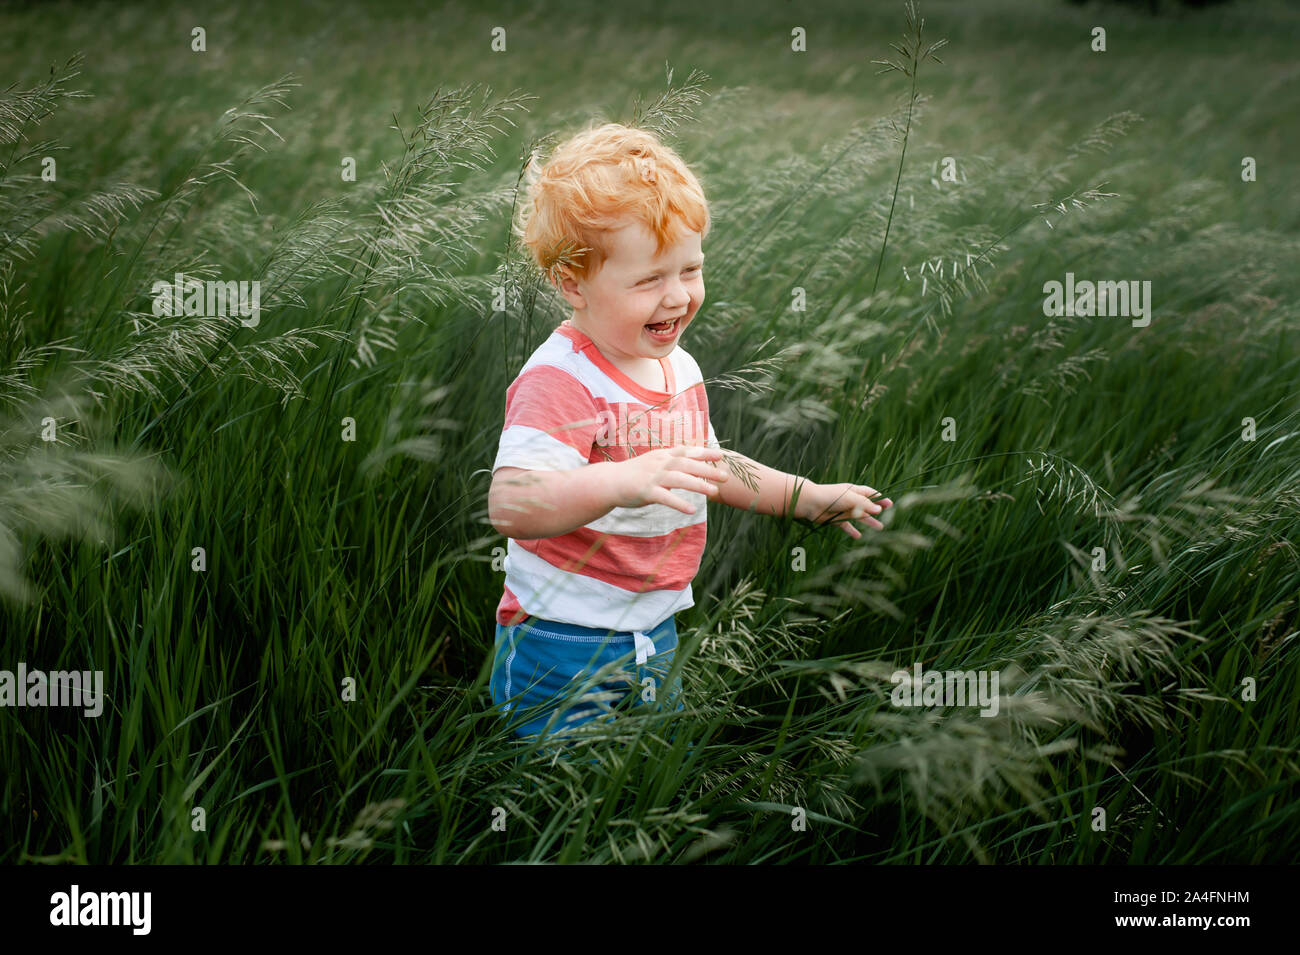 Toddler boy 1-2 years old standing and laughing in long blowing grass Stock Photo